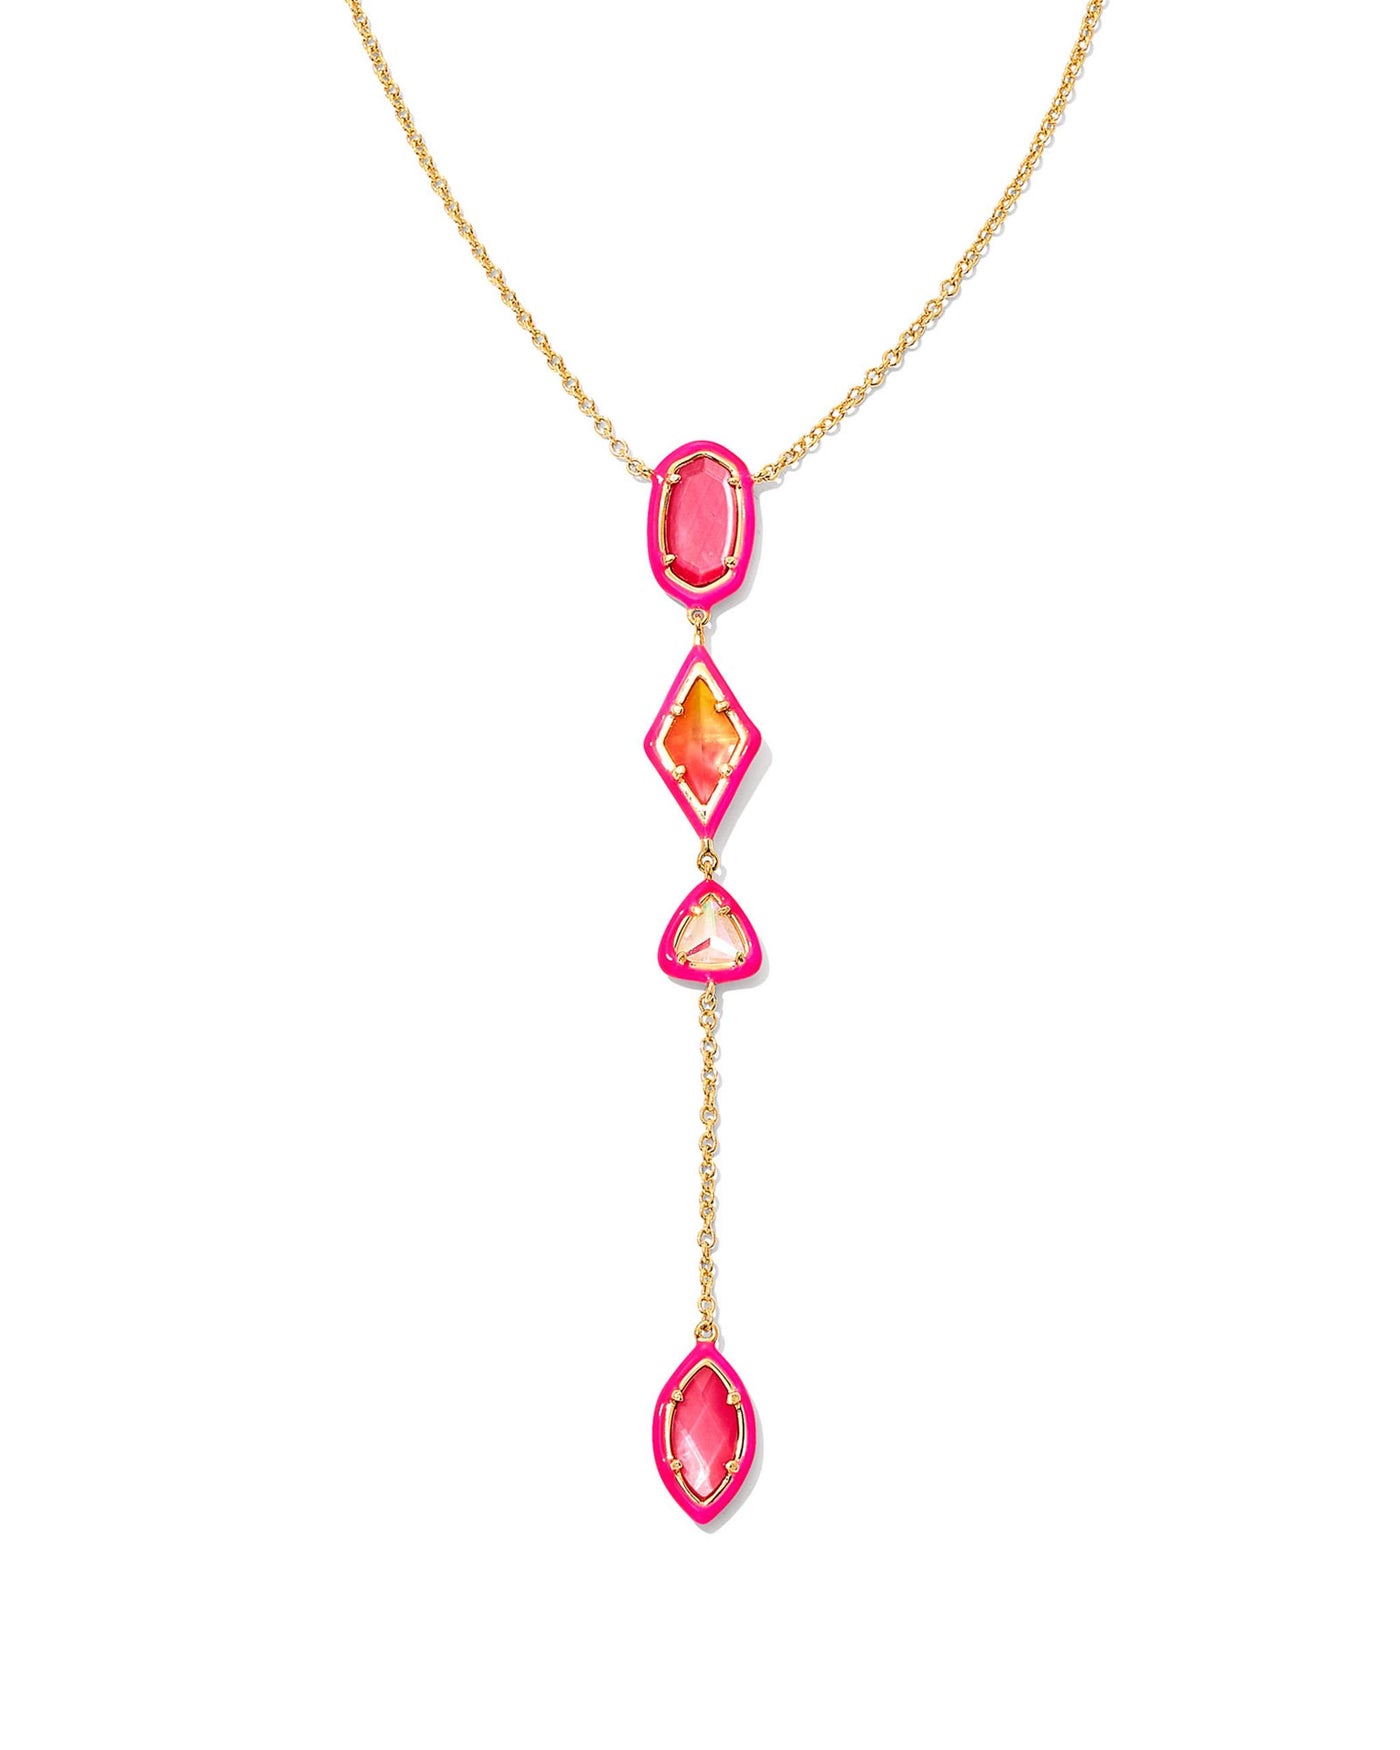 Gold Tone Necklace Featuring Ombre Pink Mix by Kendra Scott